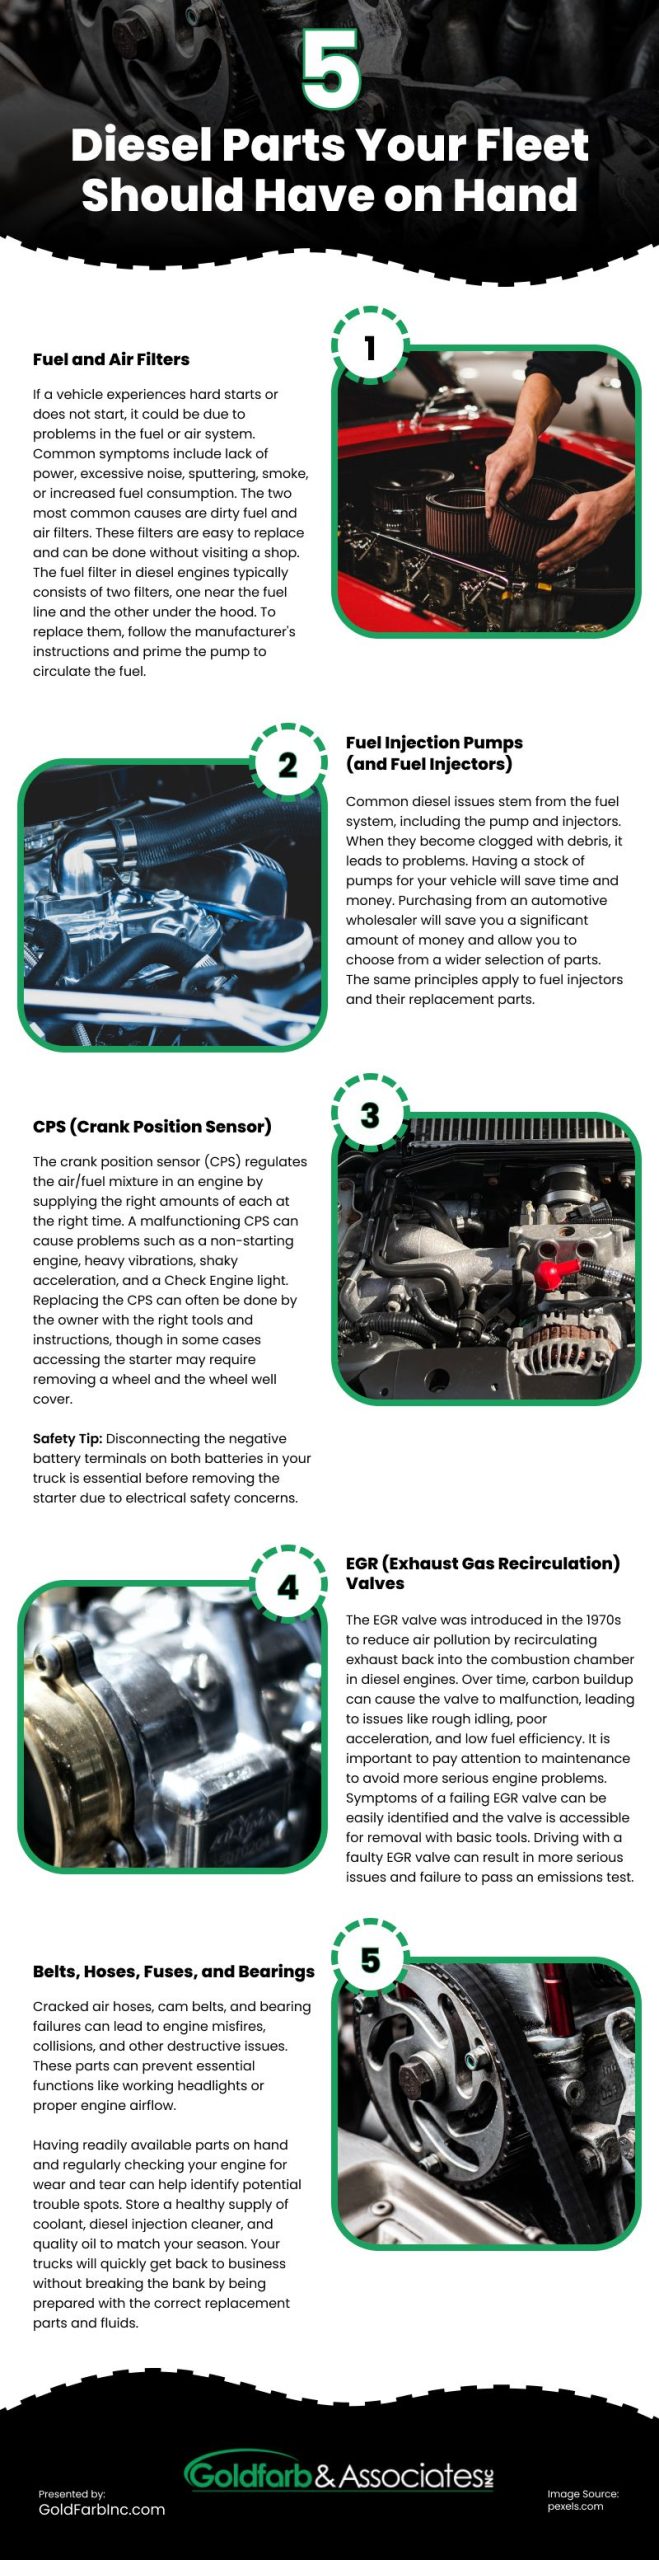 5 Diesel Parts Your Fleet Should Have on Hand Infographic